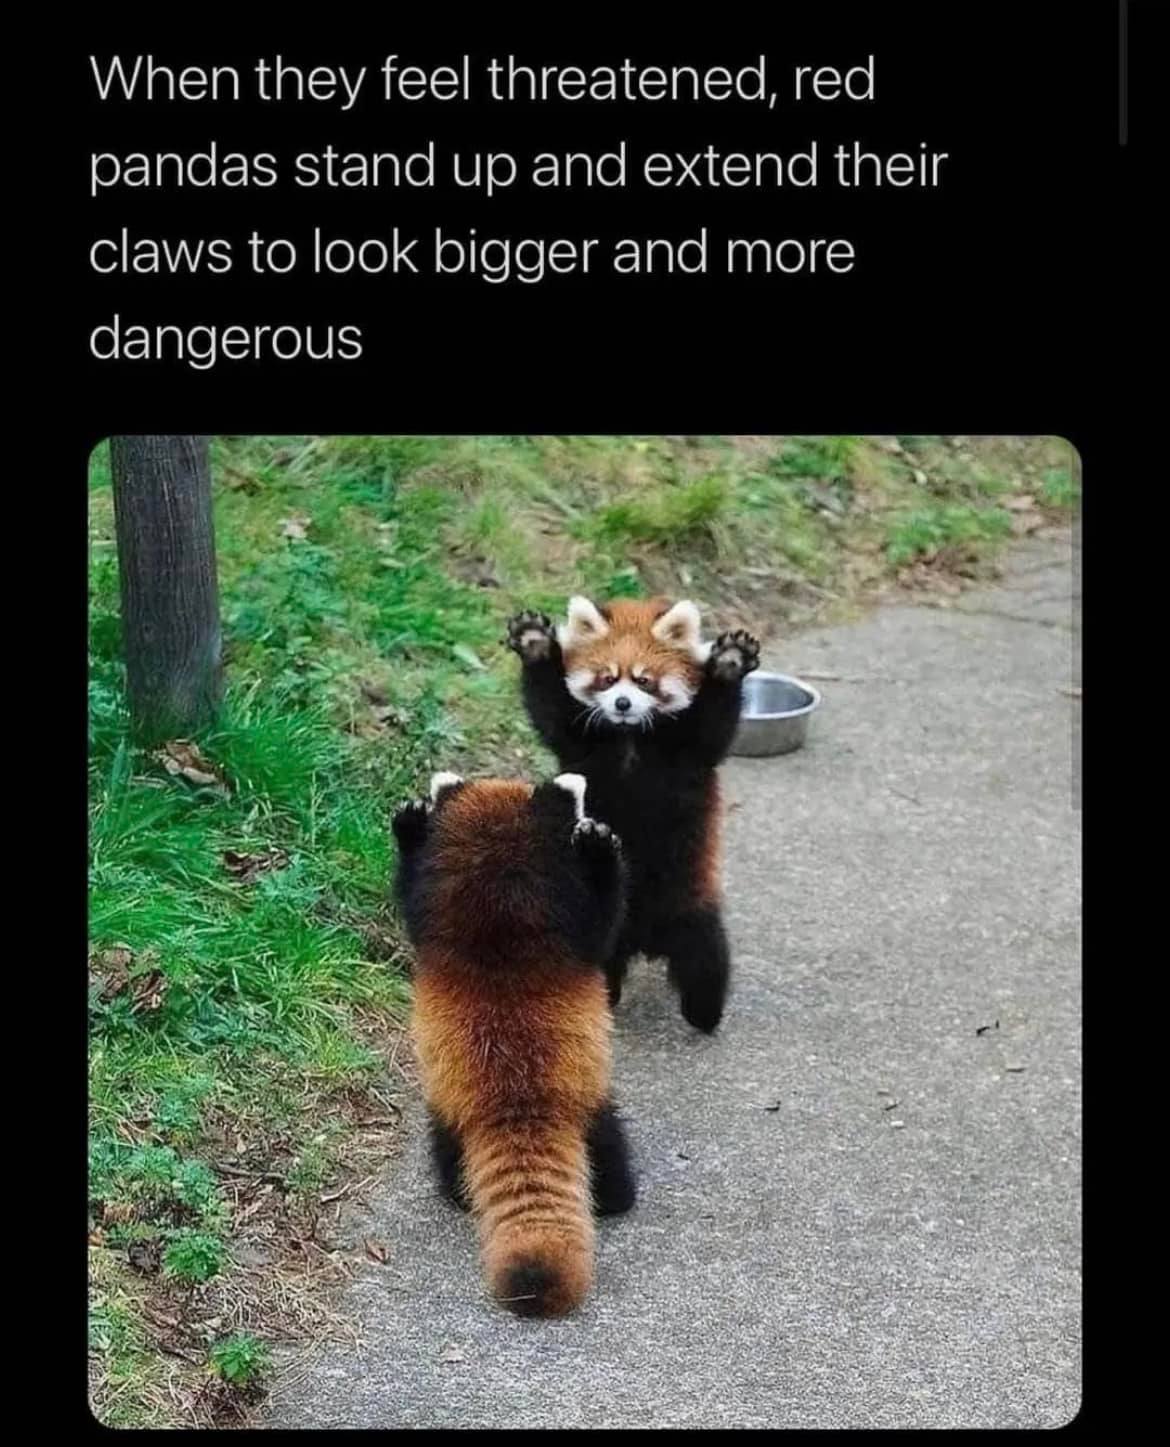 when they feel threatened, red pandas stand up and extend their claws to look bigger and more dangerous